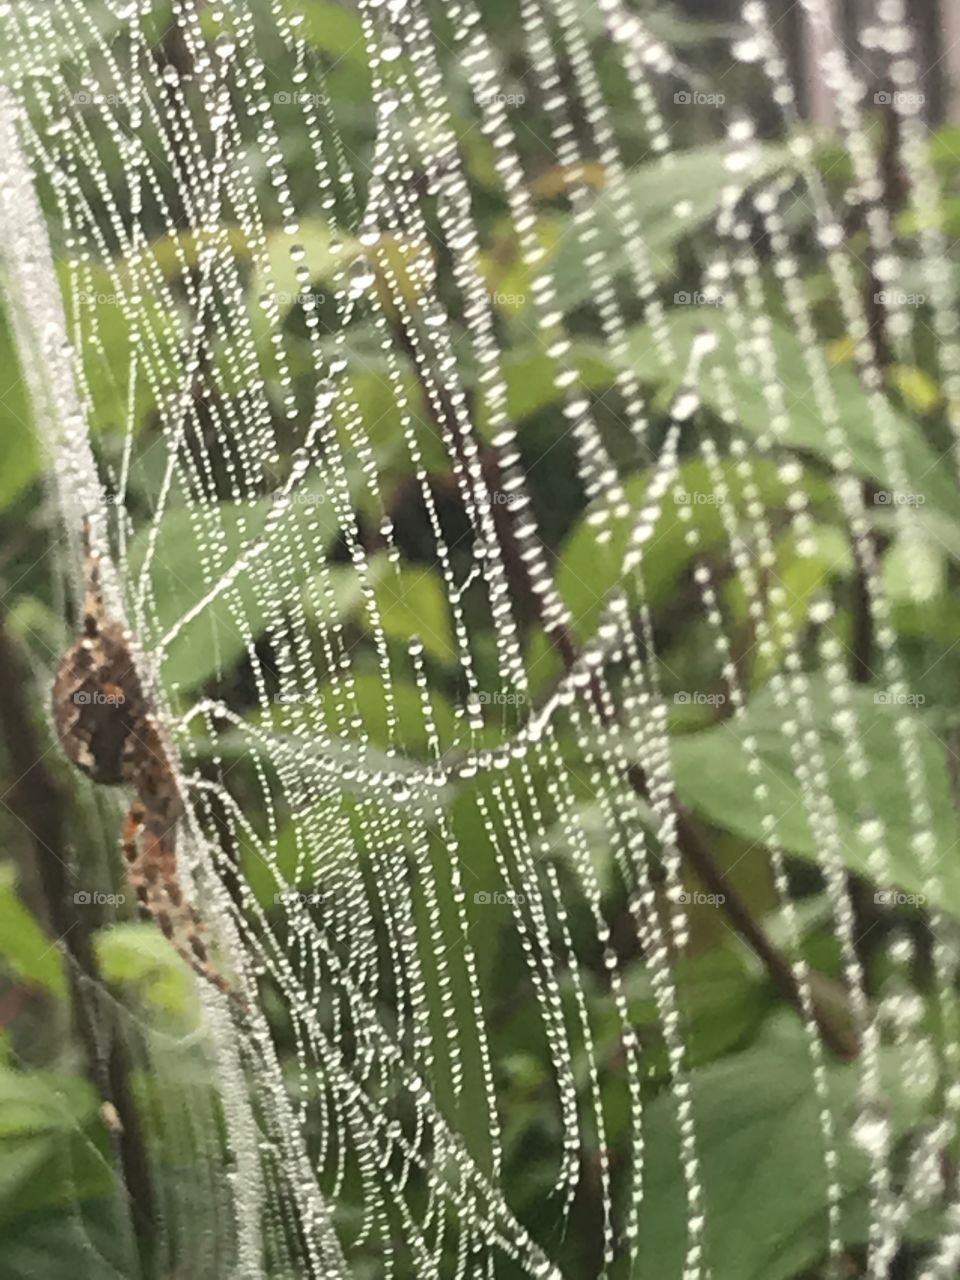 A spiderweb filled with drops of water